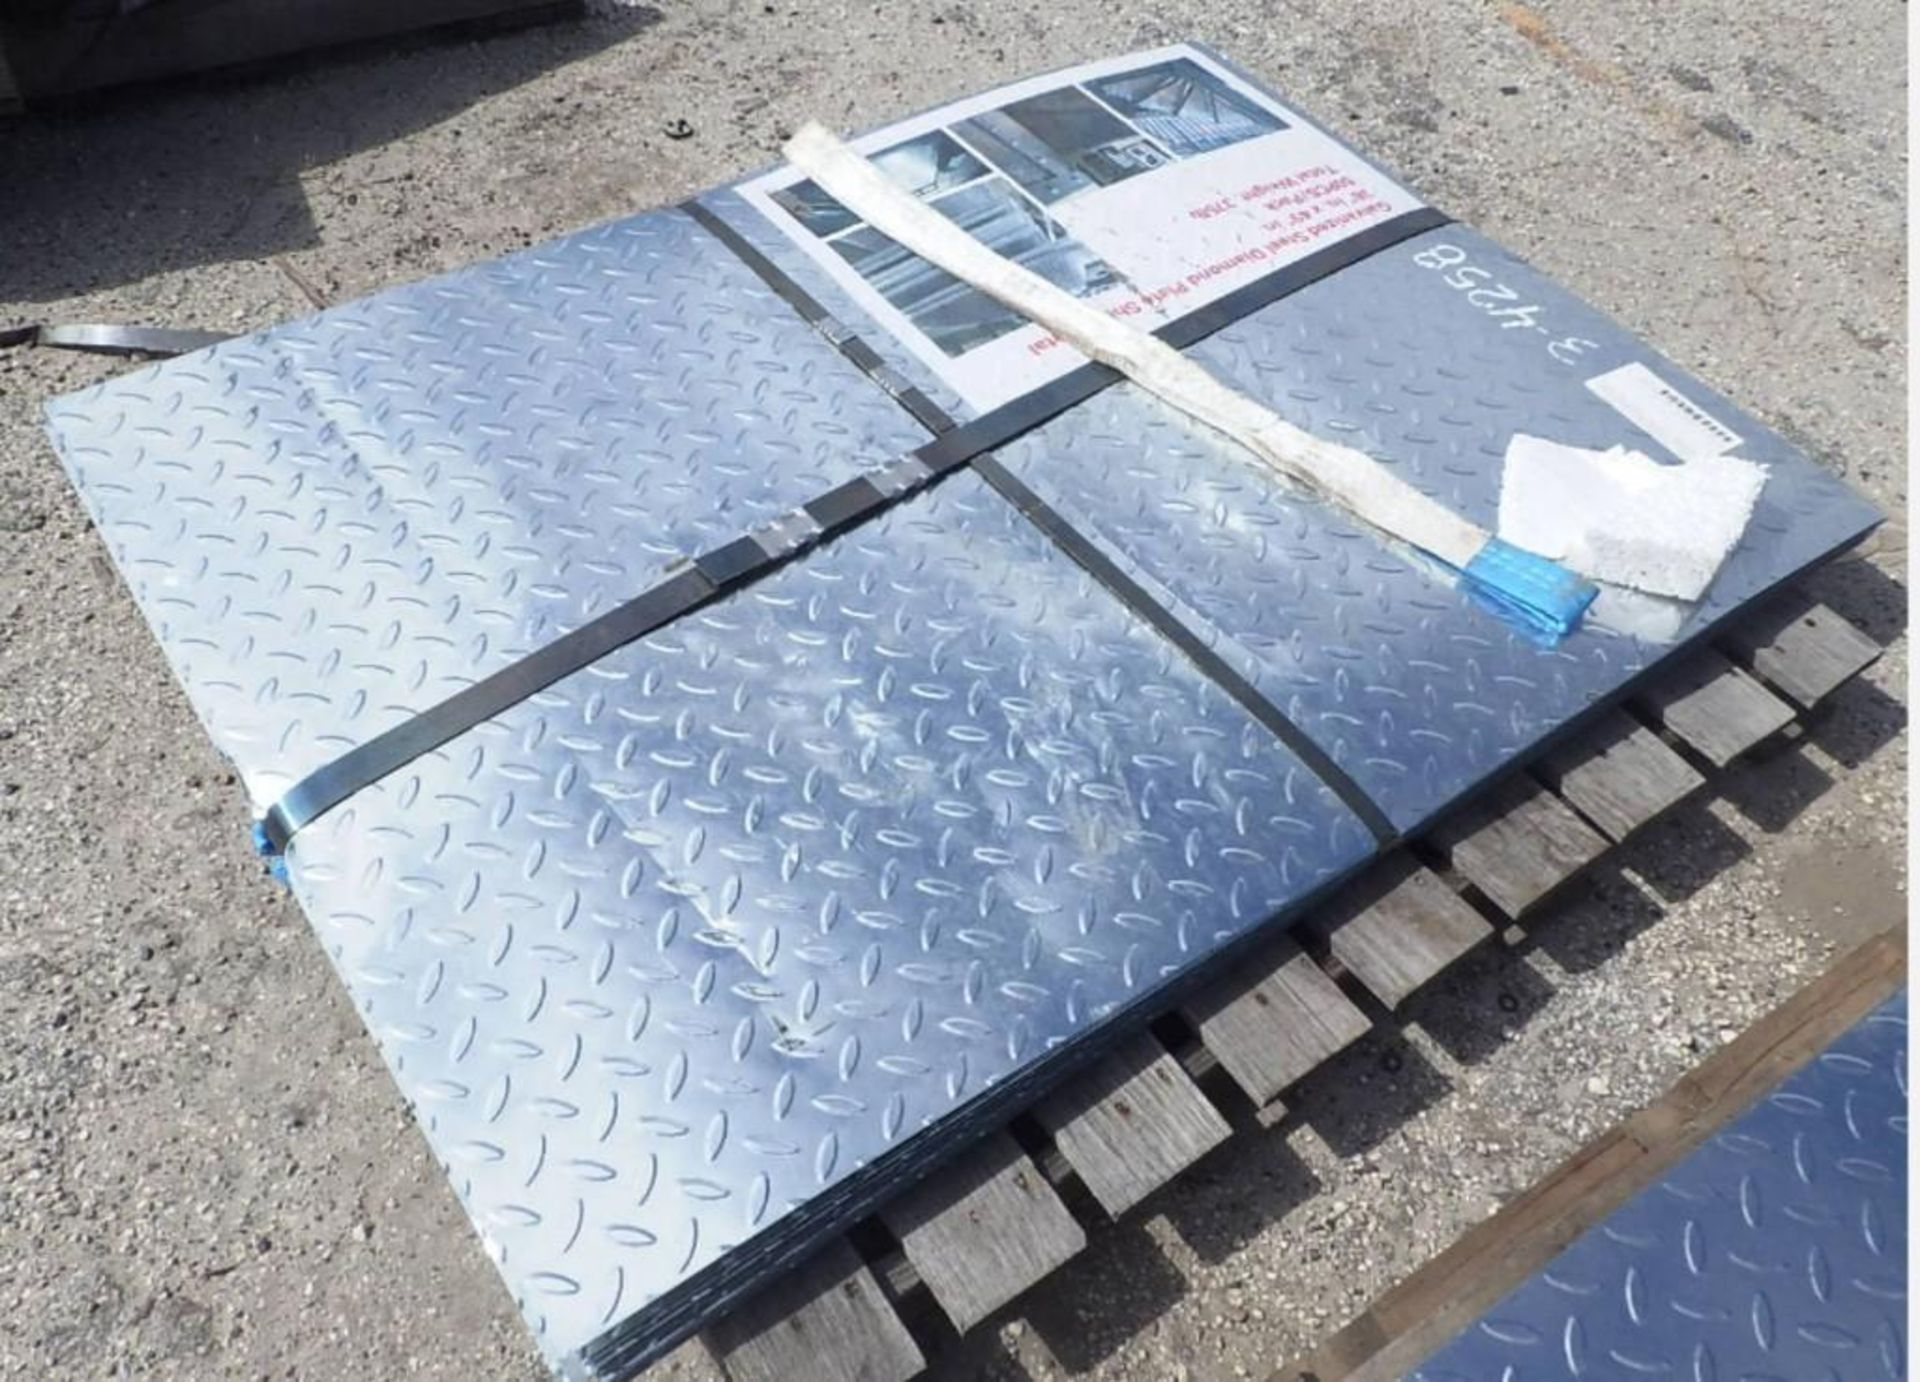 UNUSED GALVANIZED STEEL DIAMOND PLATE SHEET METAL, APPROX 38IN X 49IN, APPROX 50PIECES TOTAL